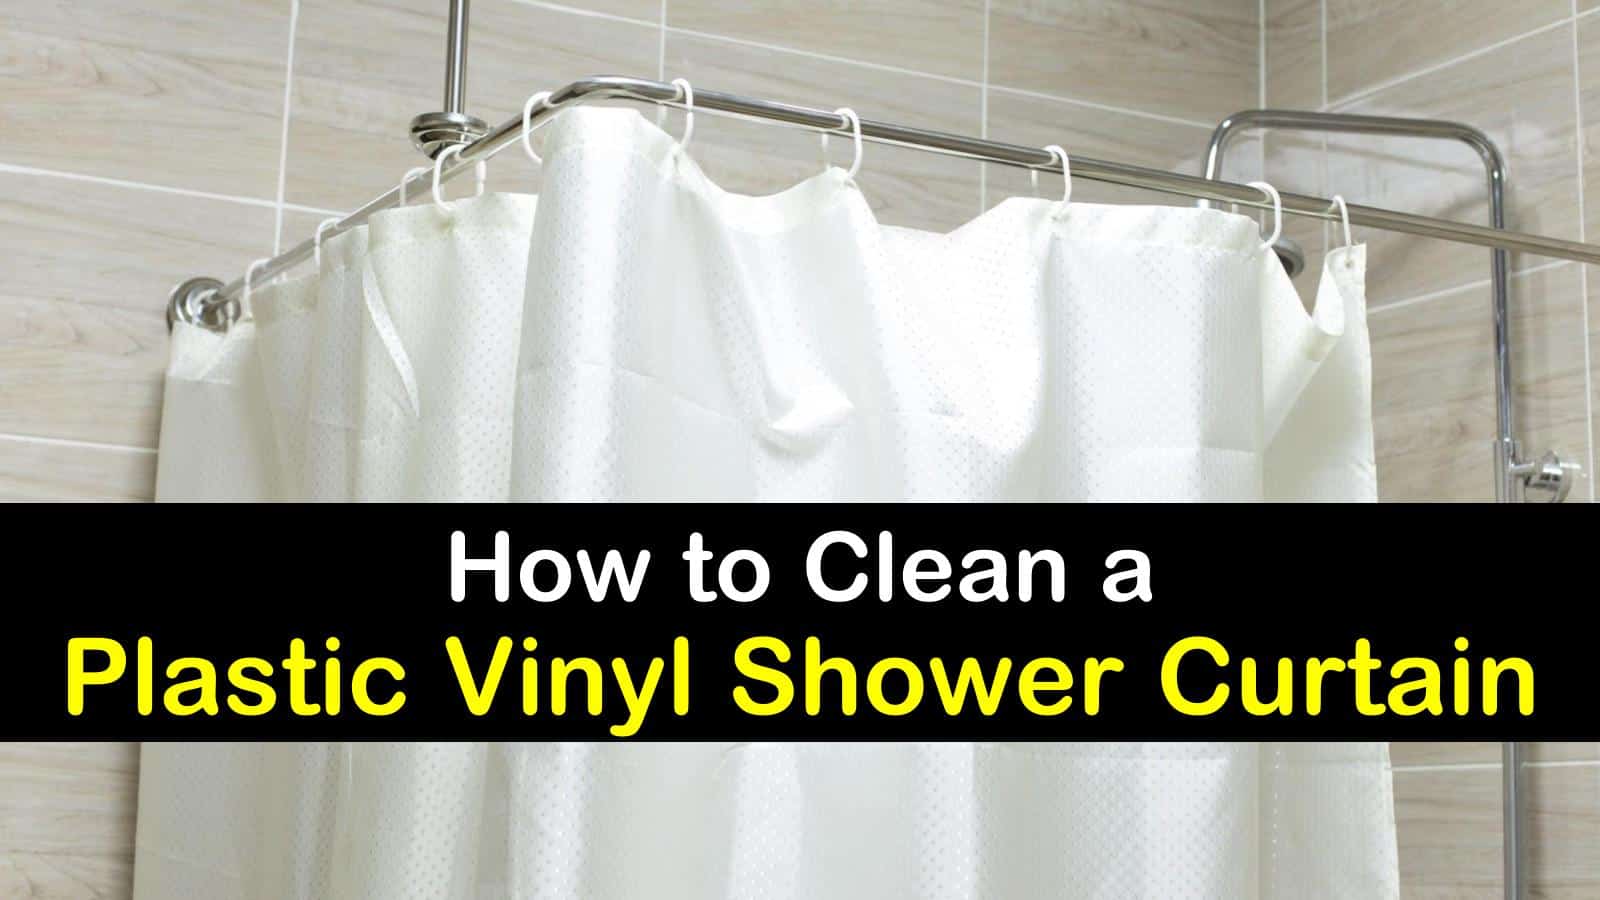 5 Excellent Ways To Clean A Shower Curtain, How To Clean Plastic Shower Curtain Liner